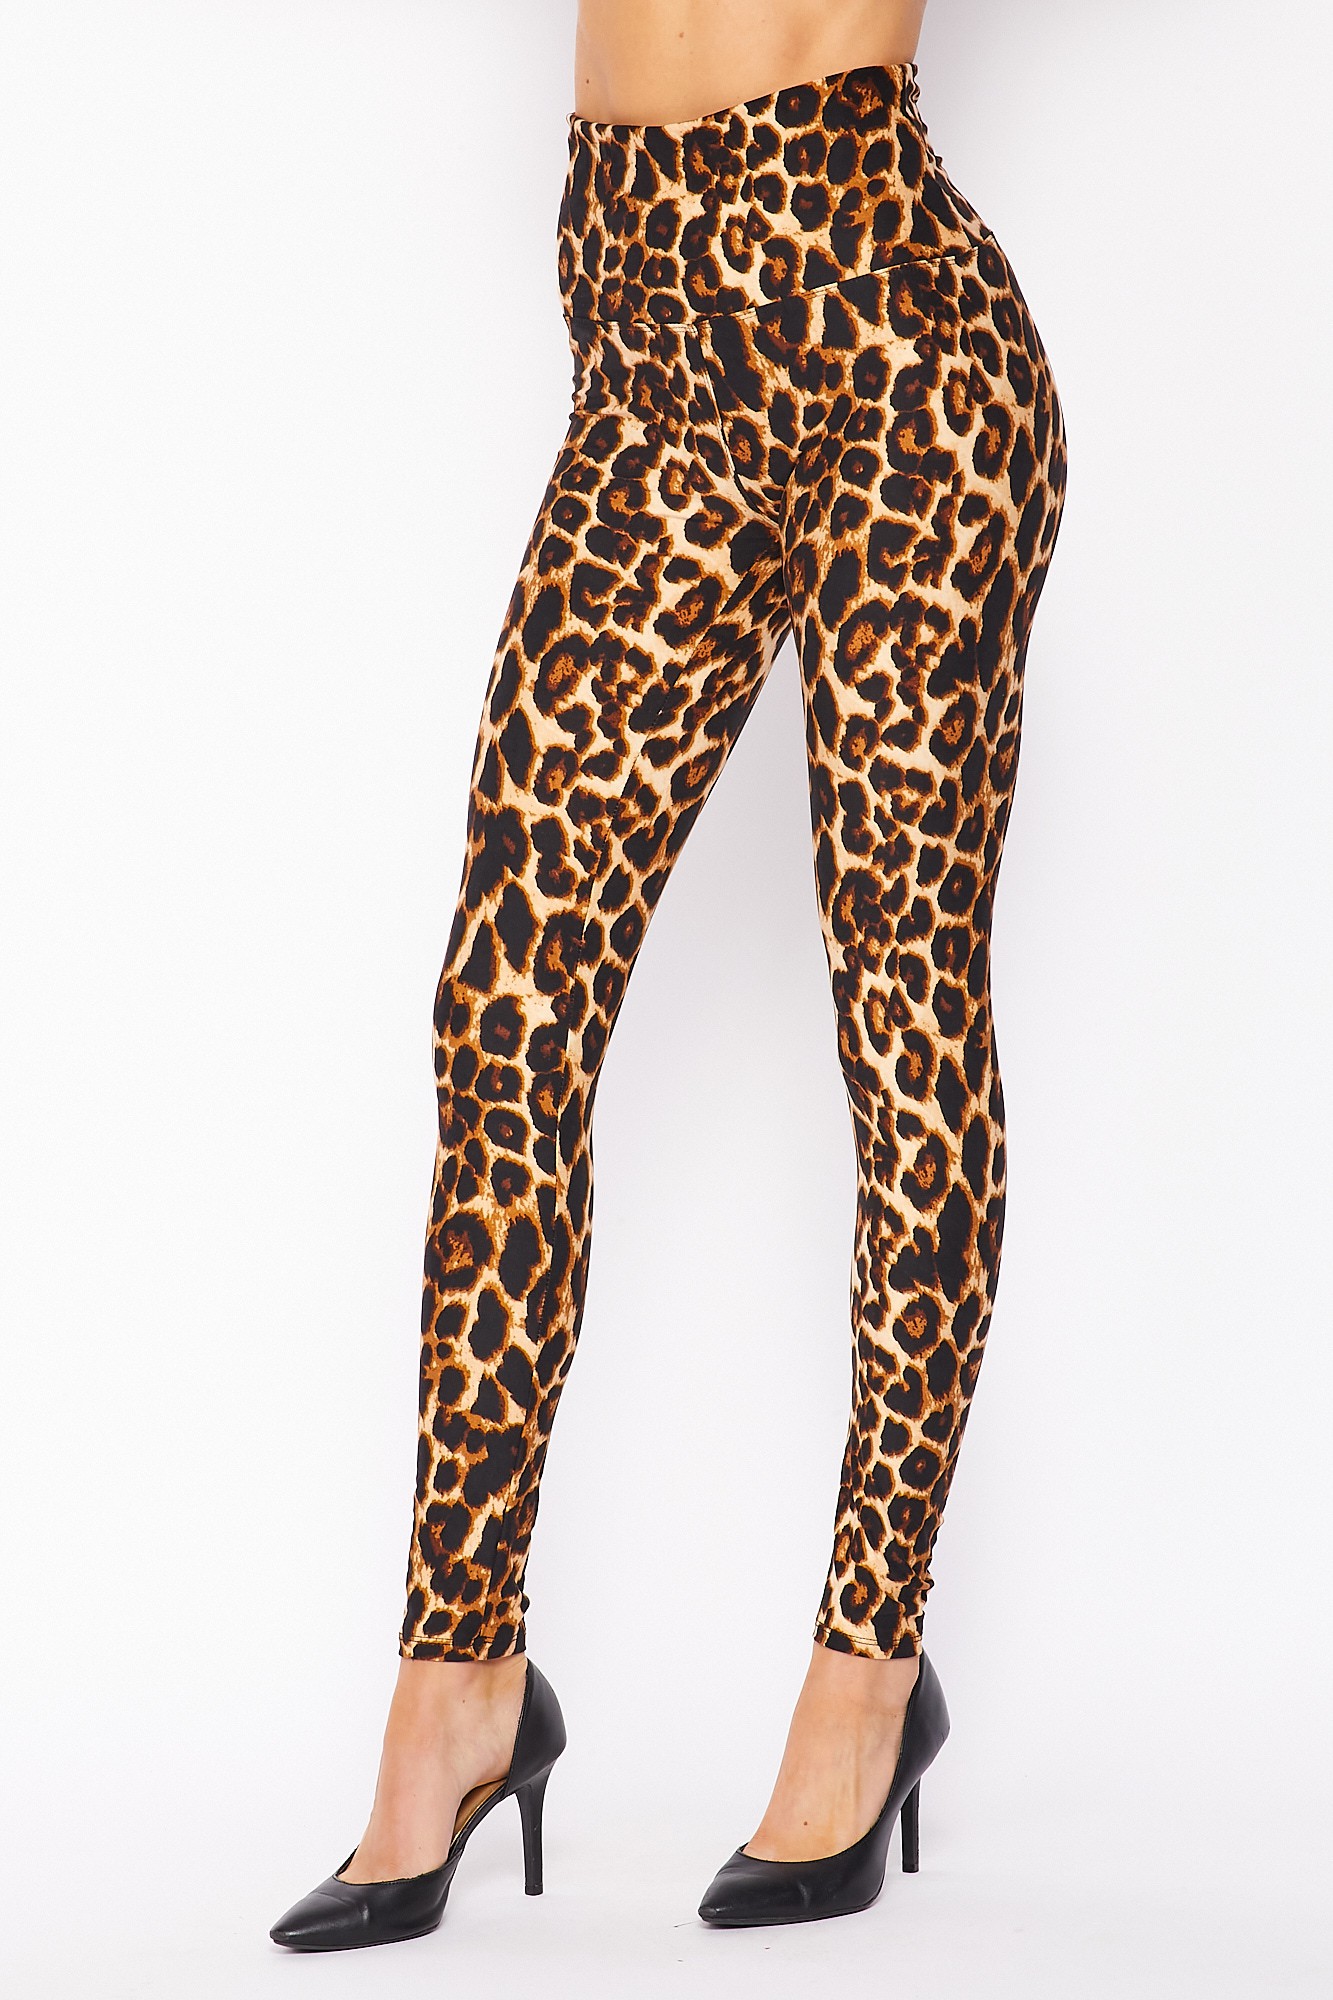 Wholesale Buttery Smooth Bold and Beautiful High Waist Leopard Plus Size Leggings - 5 Inch Waist